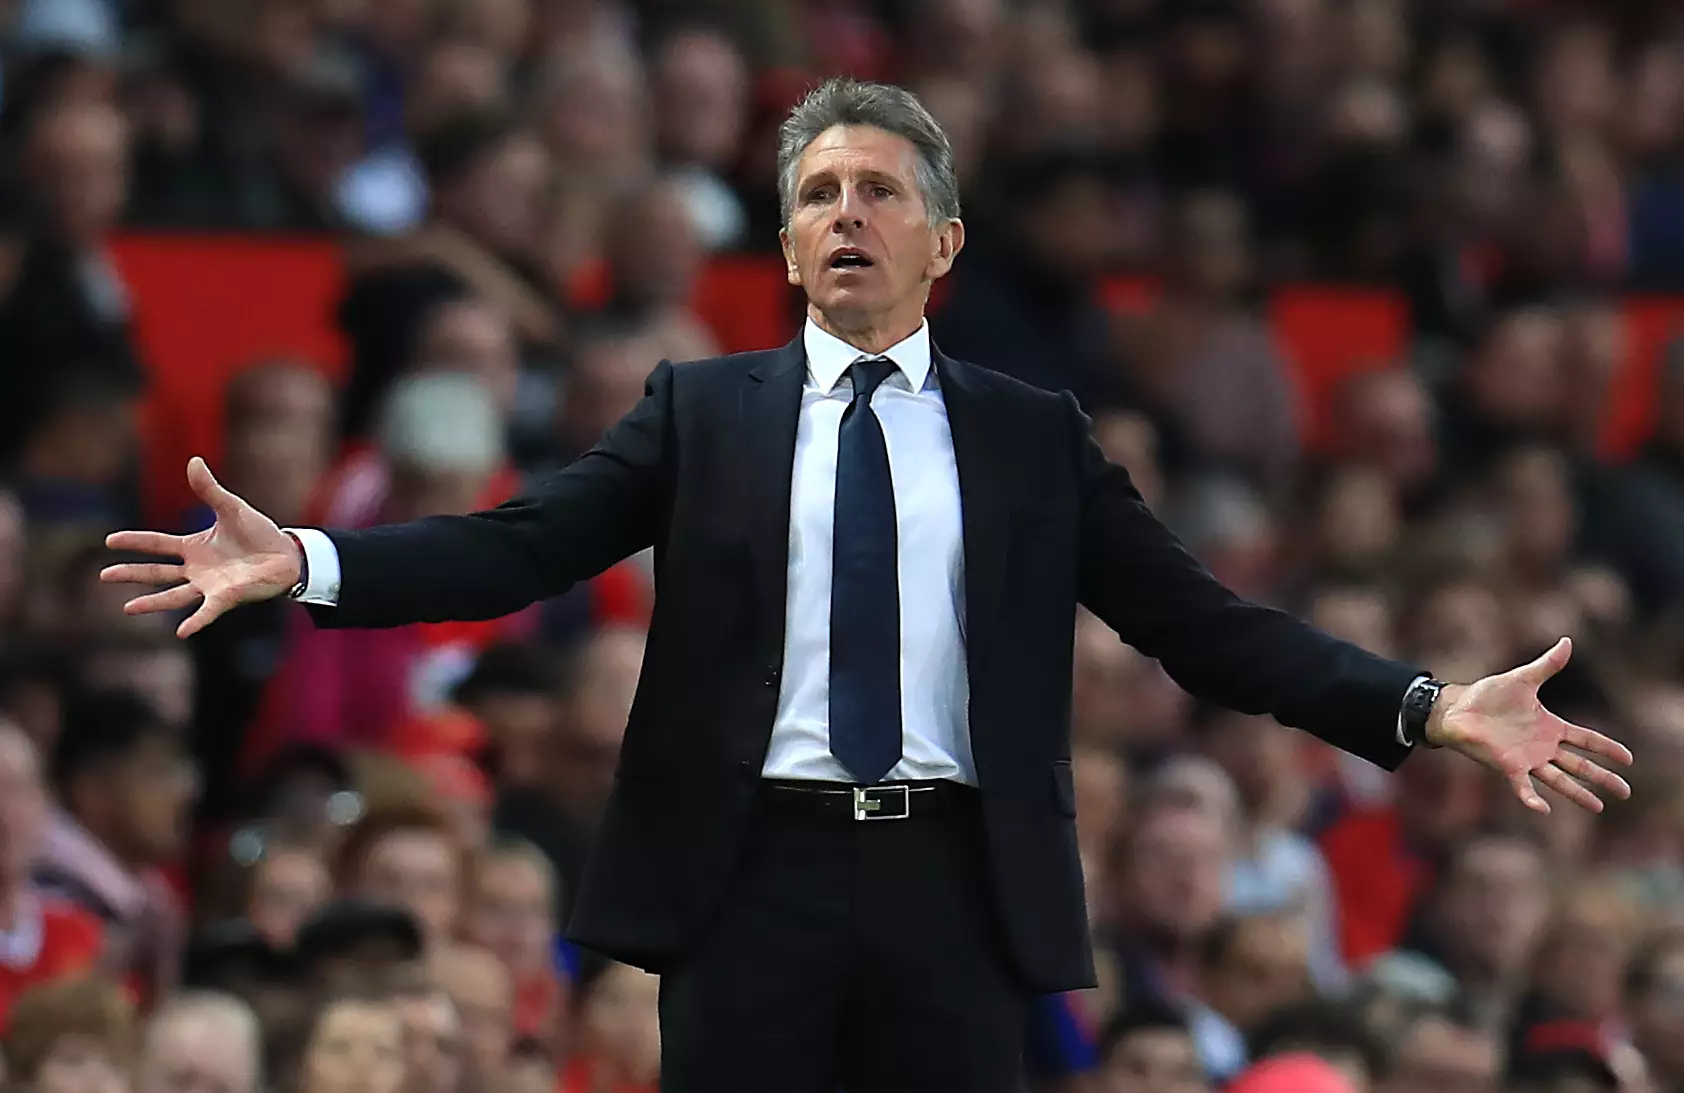 Puel was under pressure after losing to United. Image: PA Images